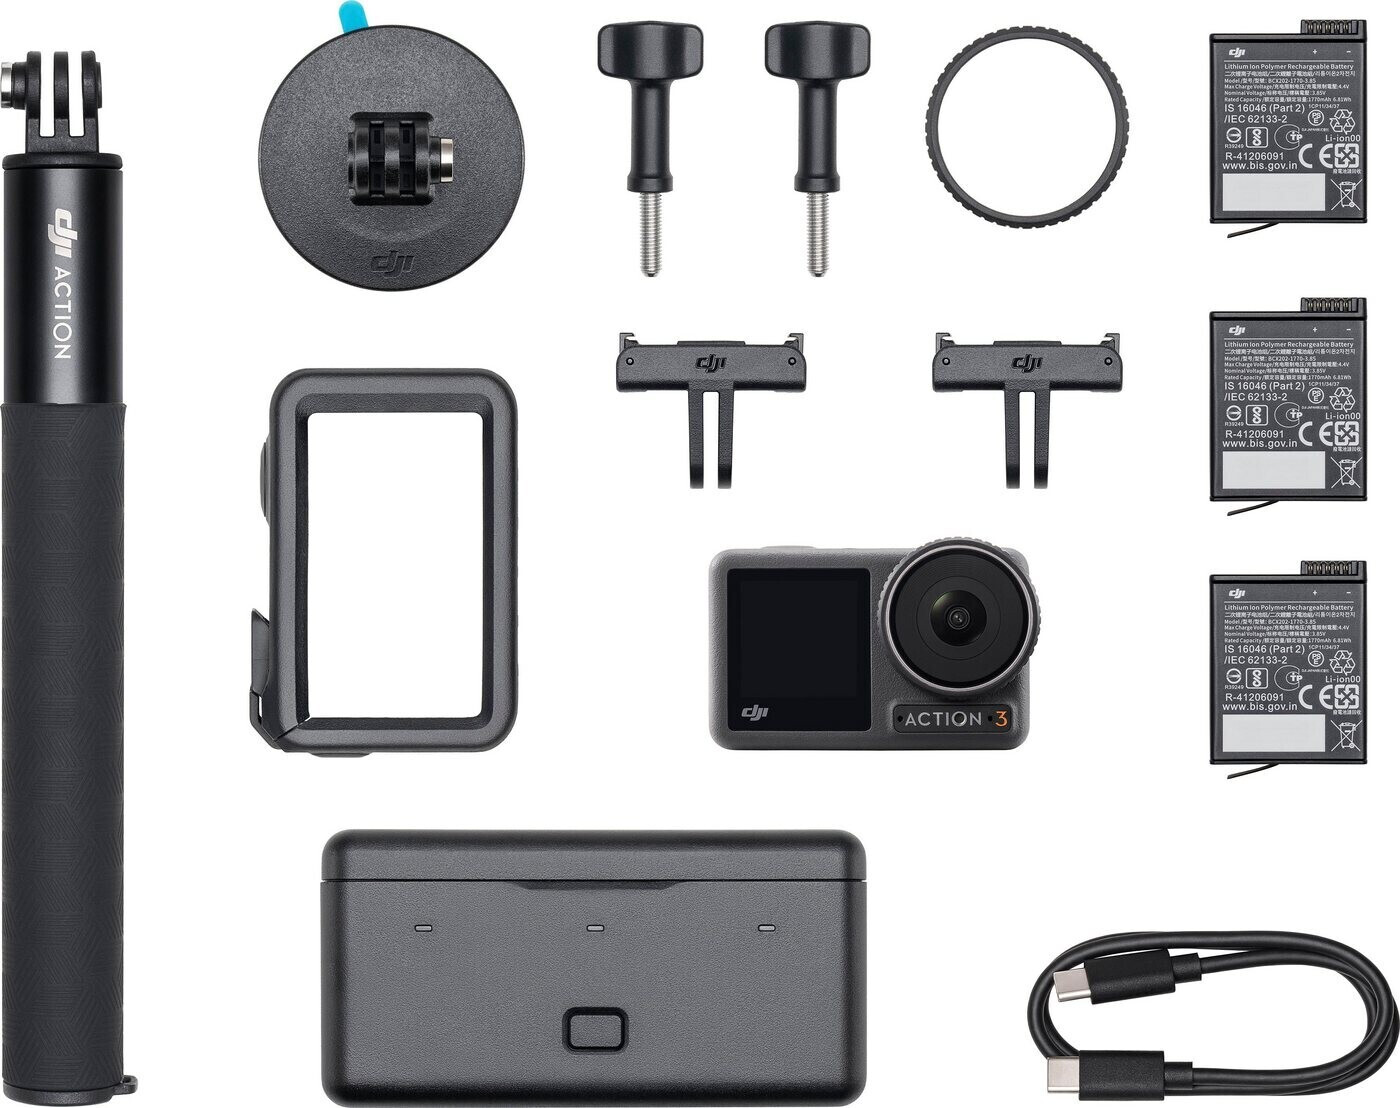 Buy DJI – Deals Best (Today) from £209.00 Osmo on Action 3